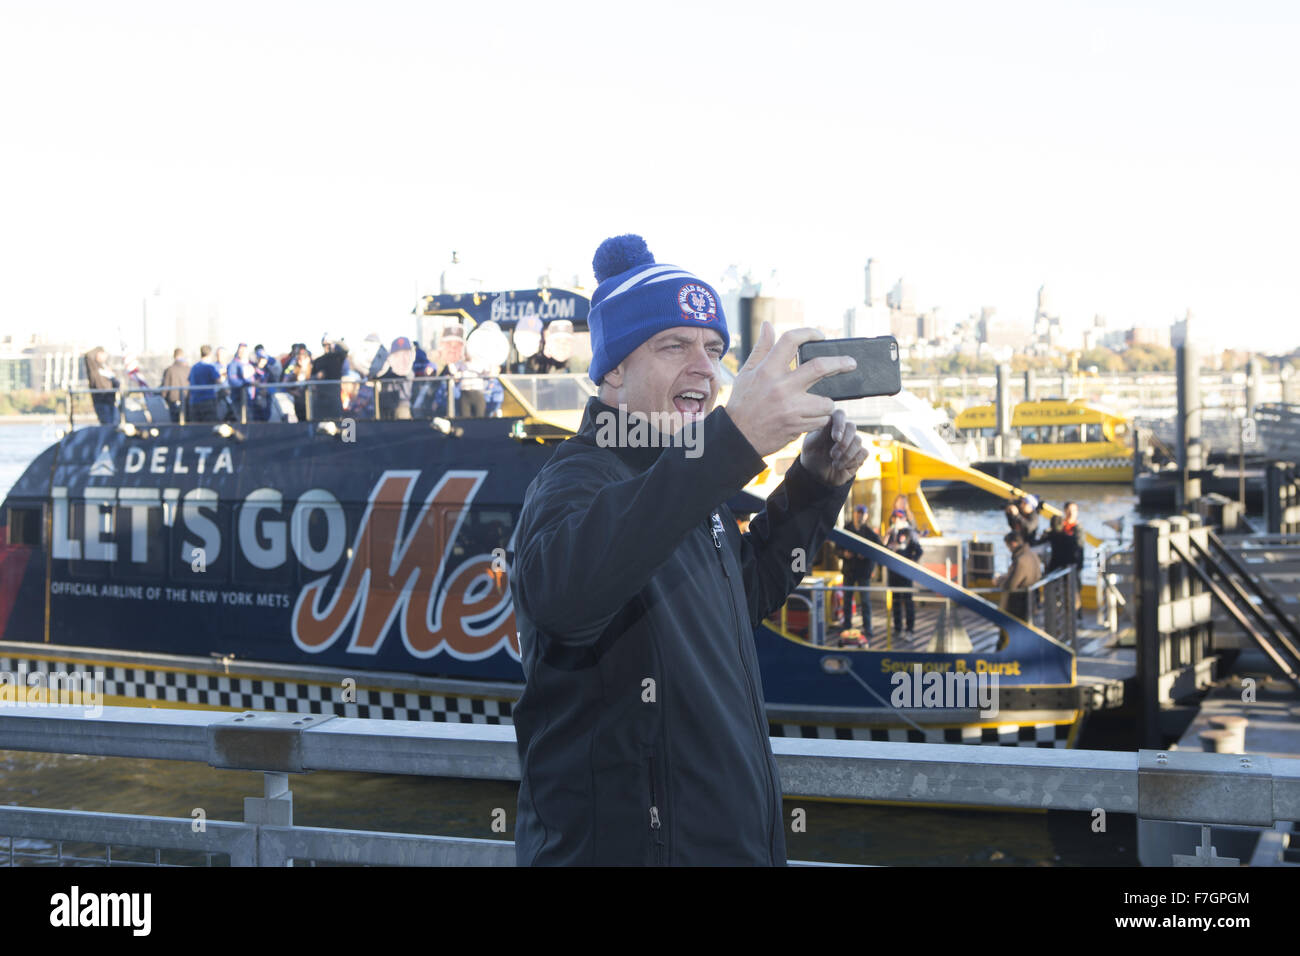 Comedian Jim Breuer and Mets legend Mike Piazza join the Delta Air Lines and New York Mets water taxi, the 'Amazin' Mets Express,' as honorary Captains  Featuring: Jim Breuer Where: New York, New York, United States When: 30 Oct 2015 Stock Photo